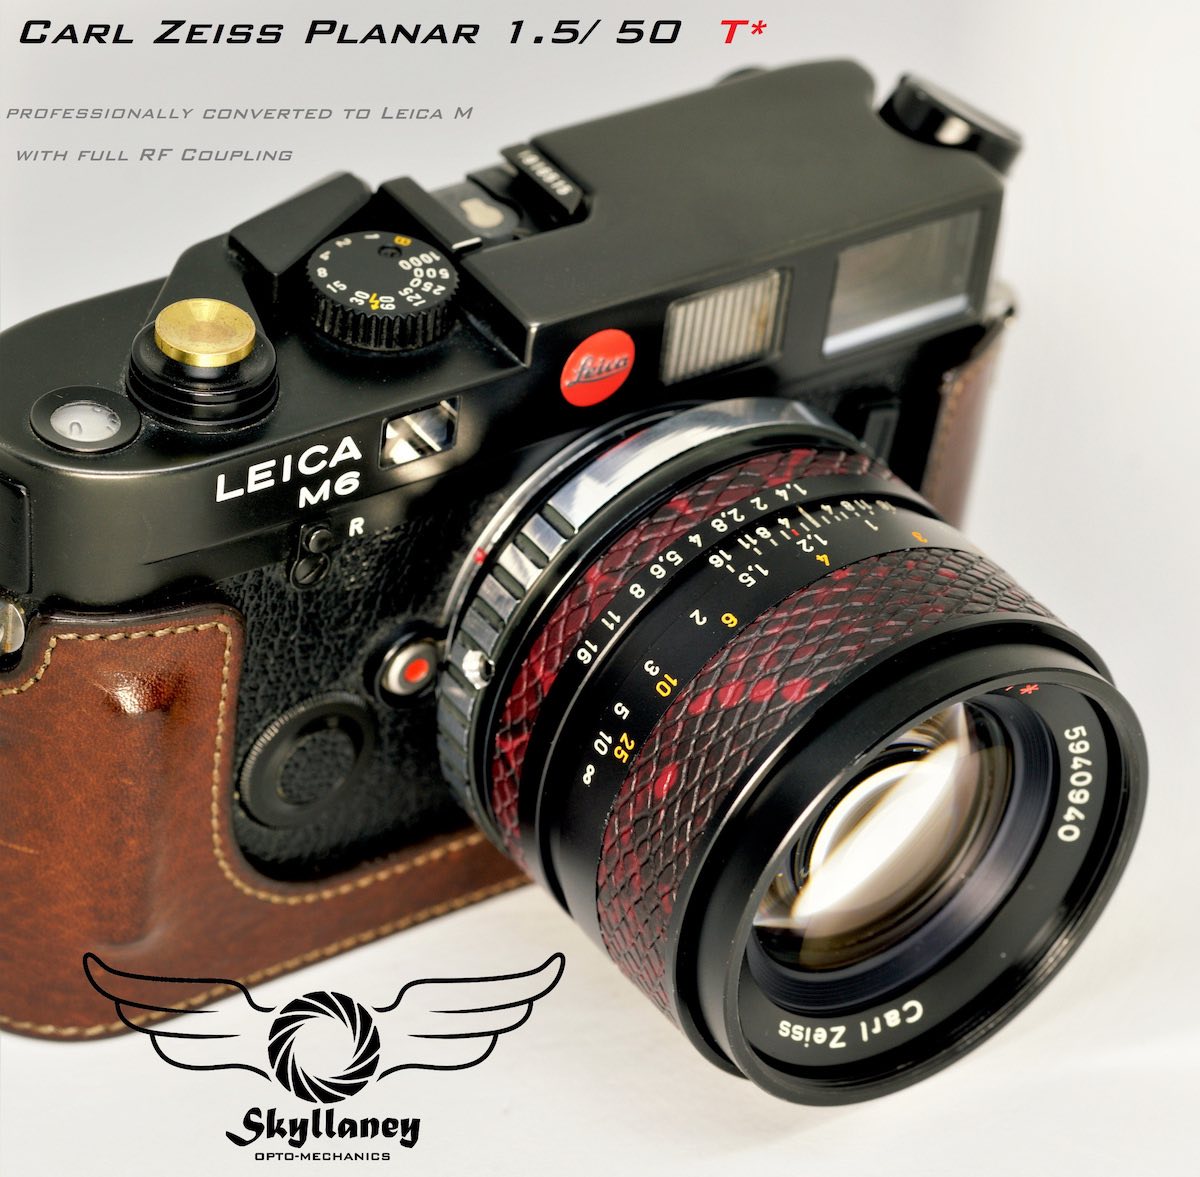 Skyllaney S Mkii Conversion Of The Carl Zeiss 50mm F 1 4 Planar T Lens Is Now Available Leica Rumors